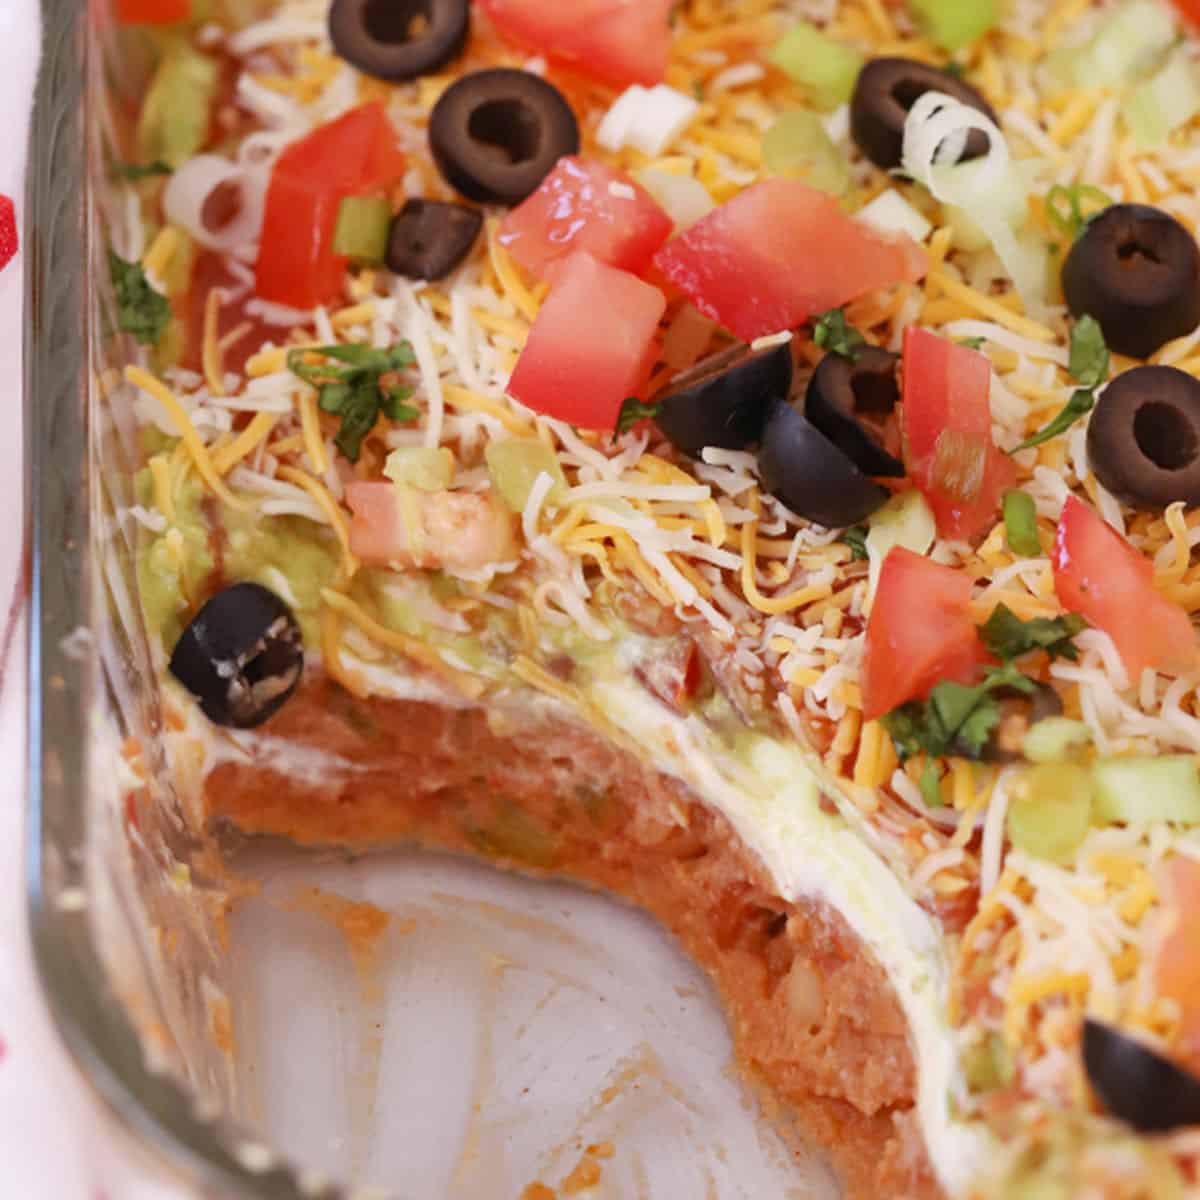 cold 7 layer bean dip, easy appetizer